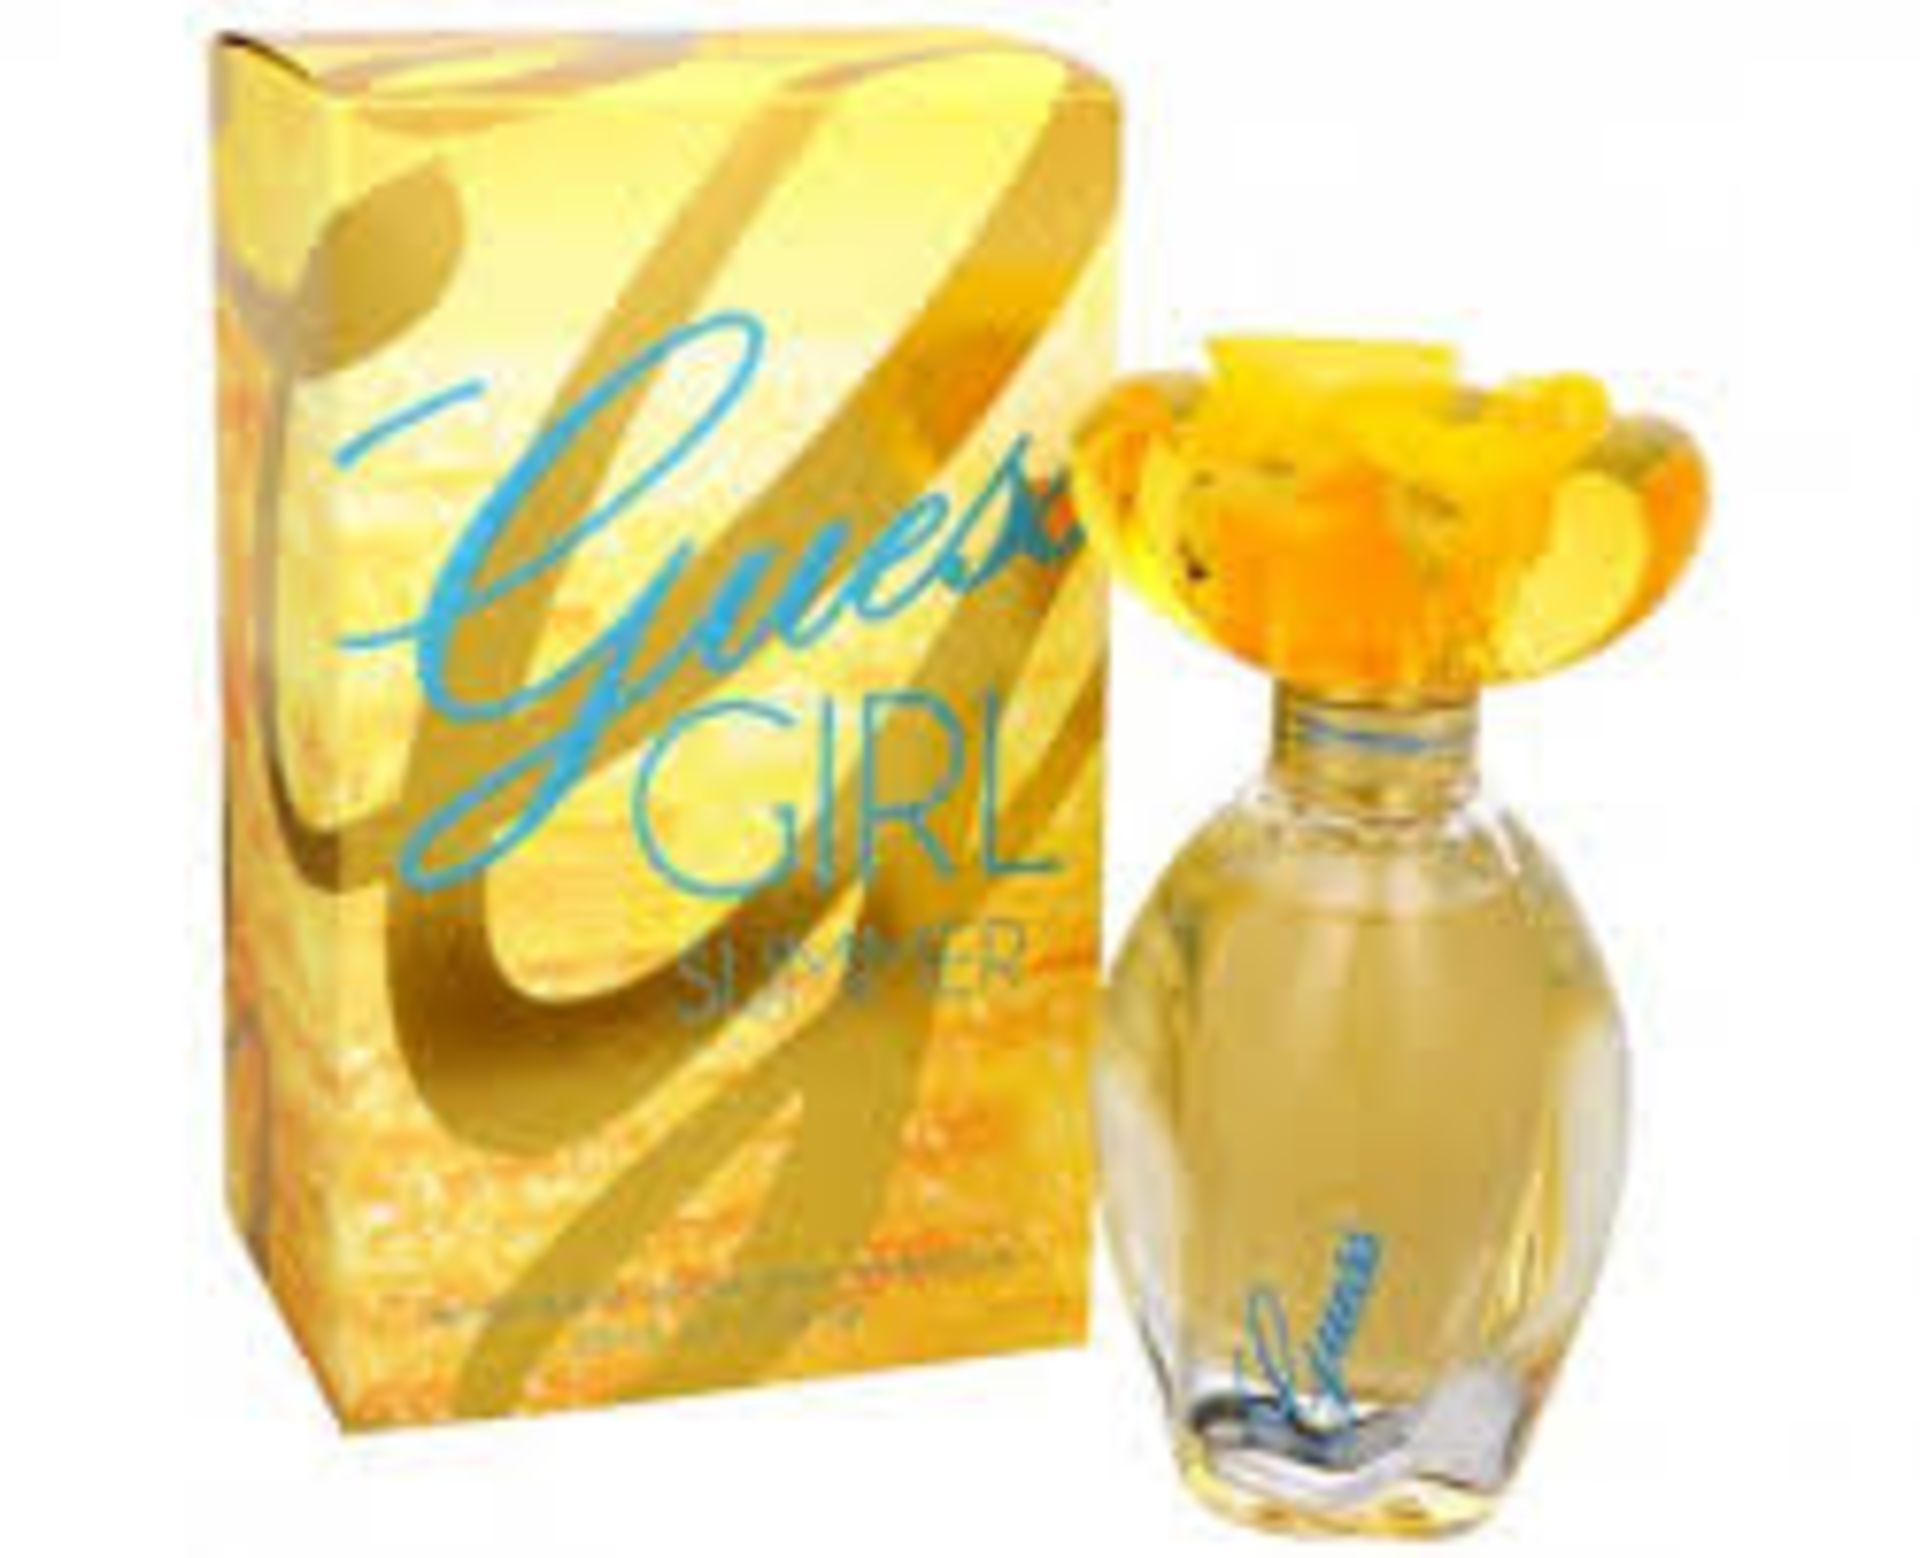 V *TRADE QTY* Brand New Guess Girl Summer Eau De Toilette Natural Spray X 10 YOUR BID PRICE TO BE